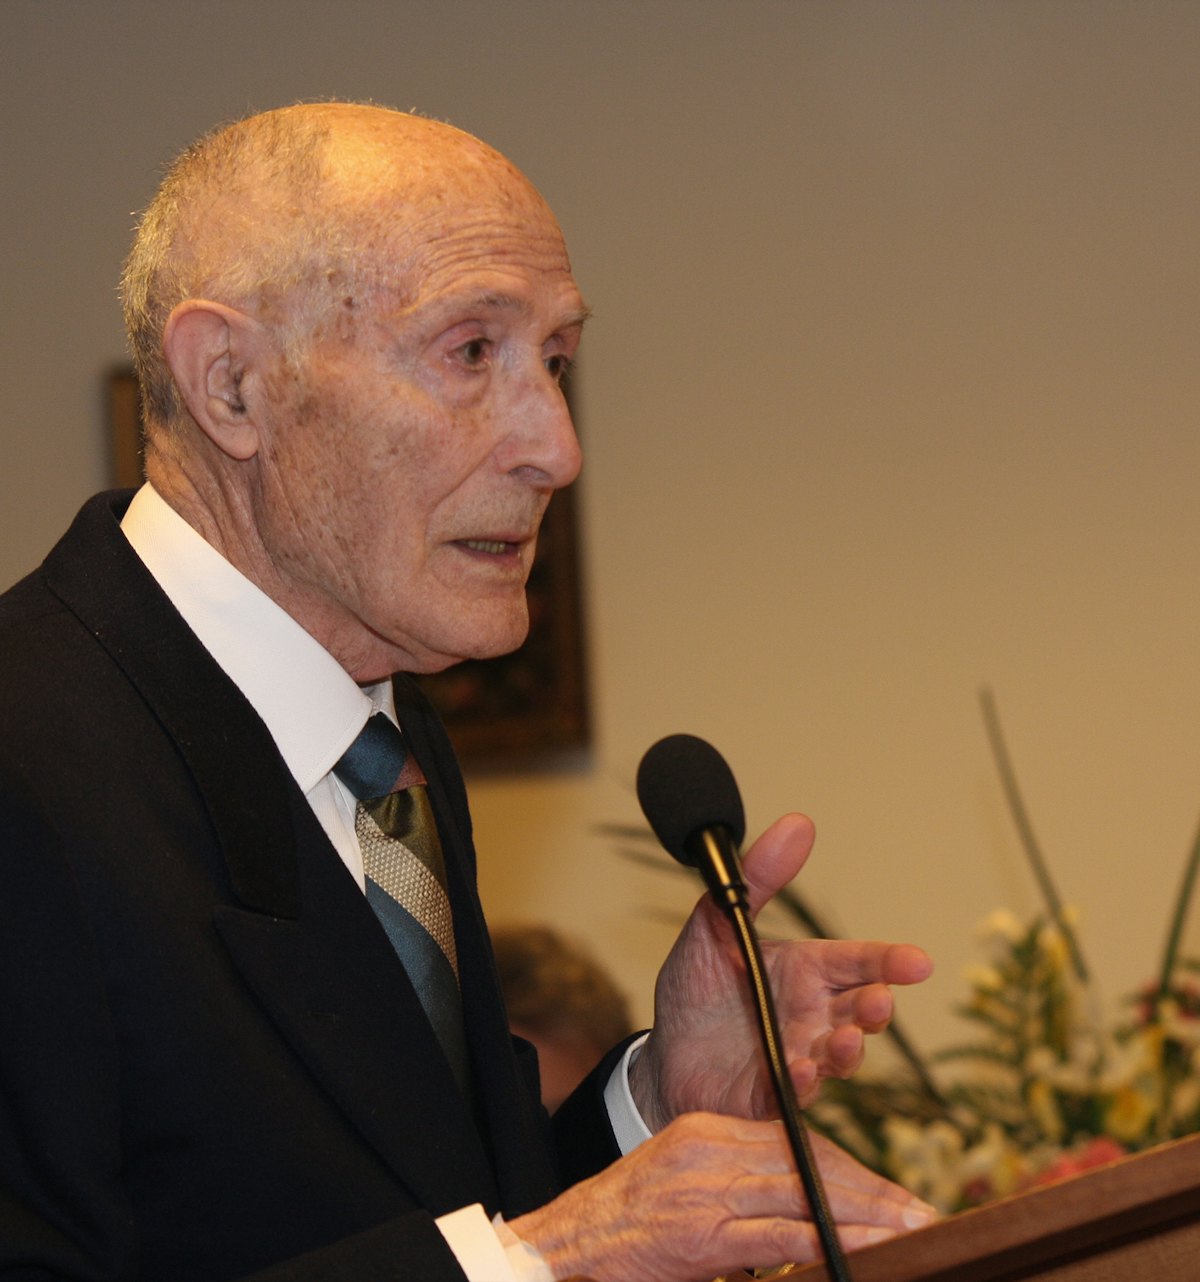 At the national convention of the Baha'is of Italy, Mario Piarulli – a surviving member of the country's first National Spiritual Assembly, elected in 1962 – recounts his memories of the community's early history.